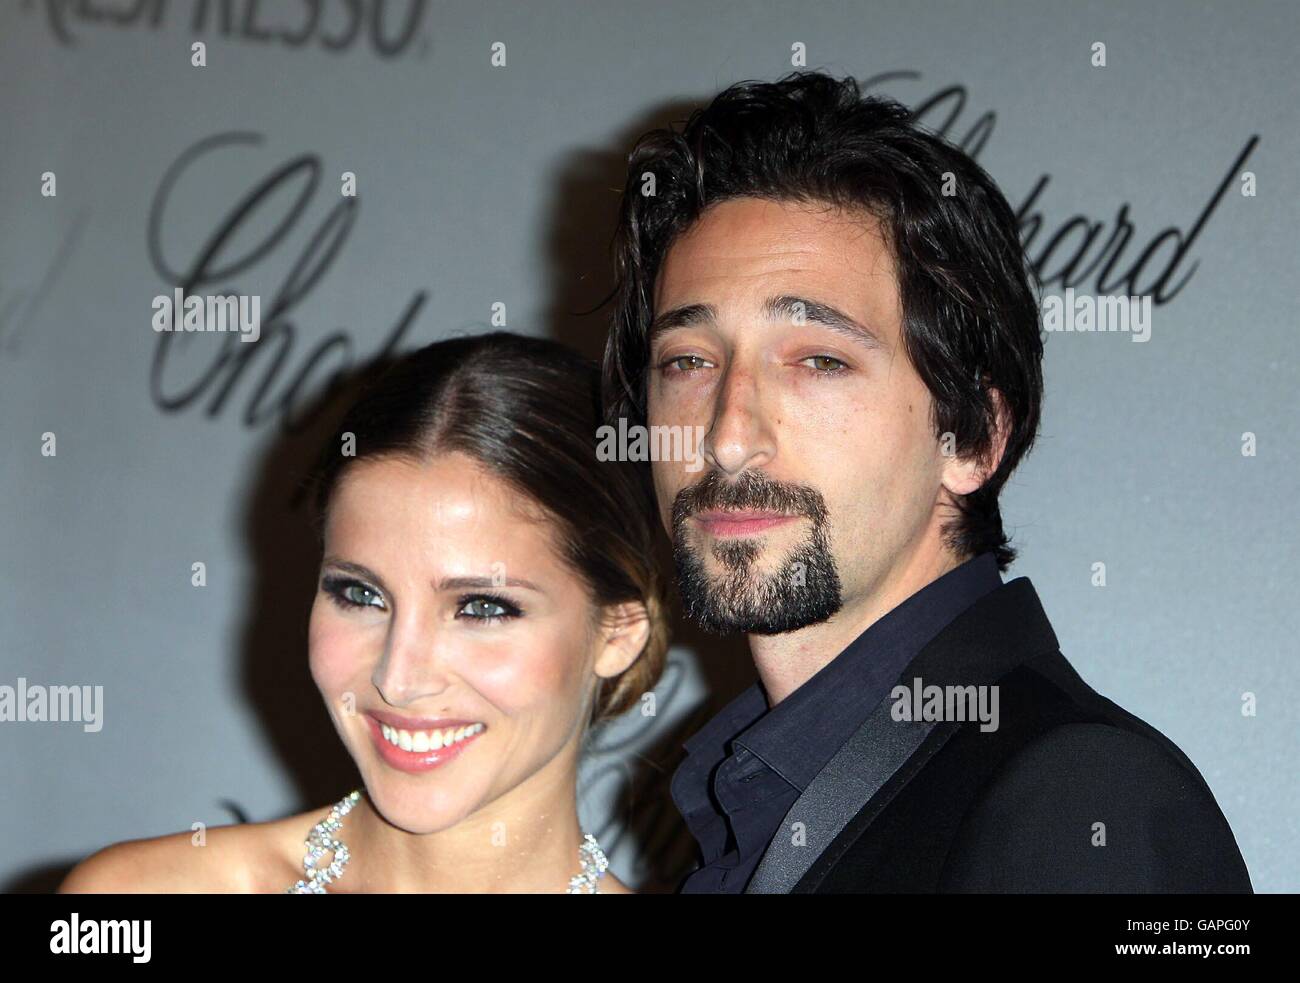 Adrien Brody And Elsa Pataky. 